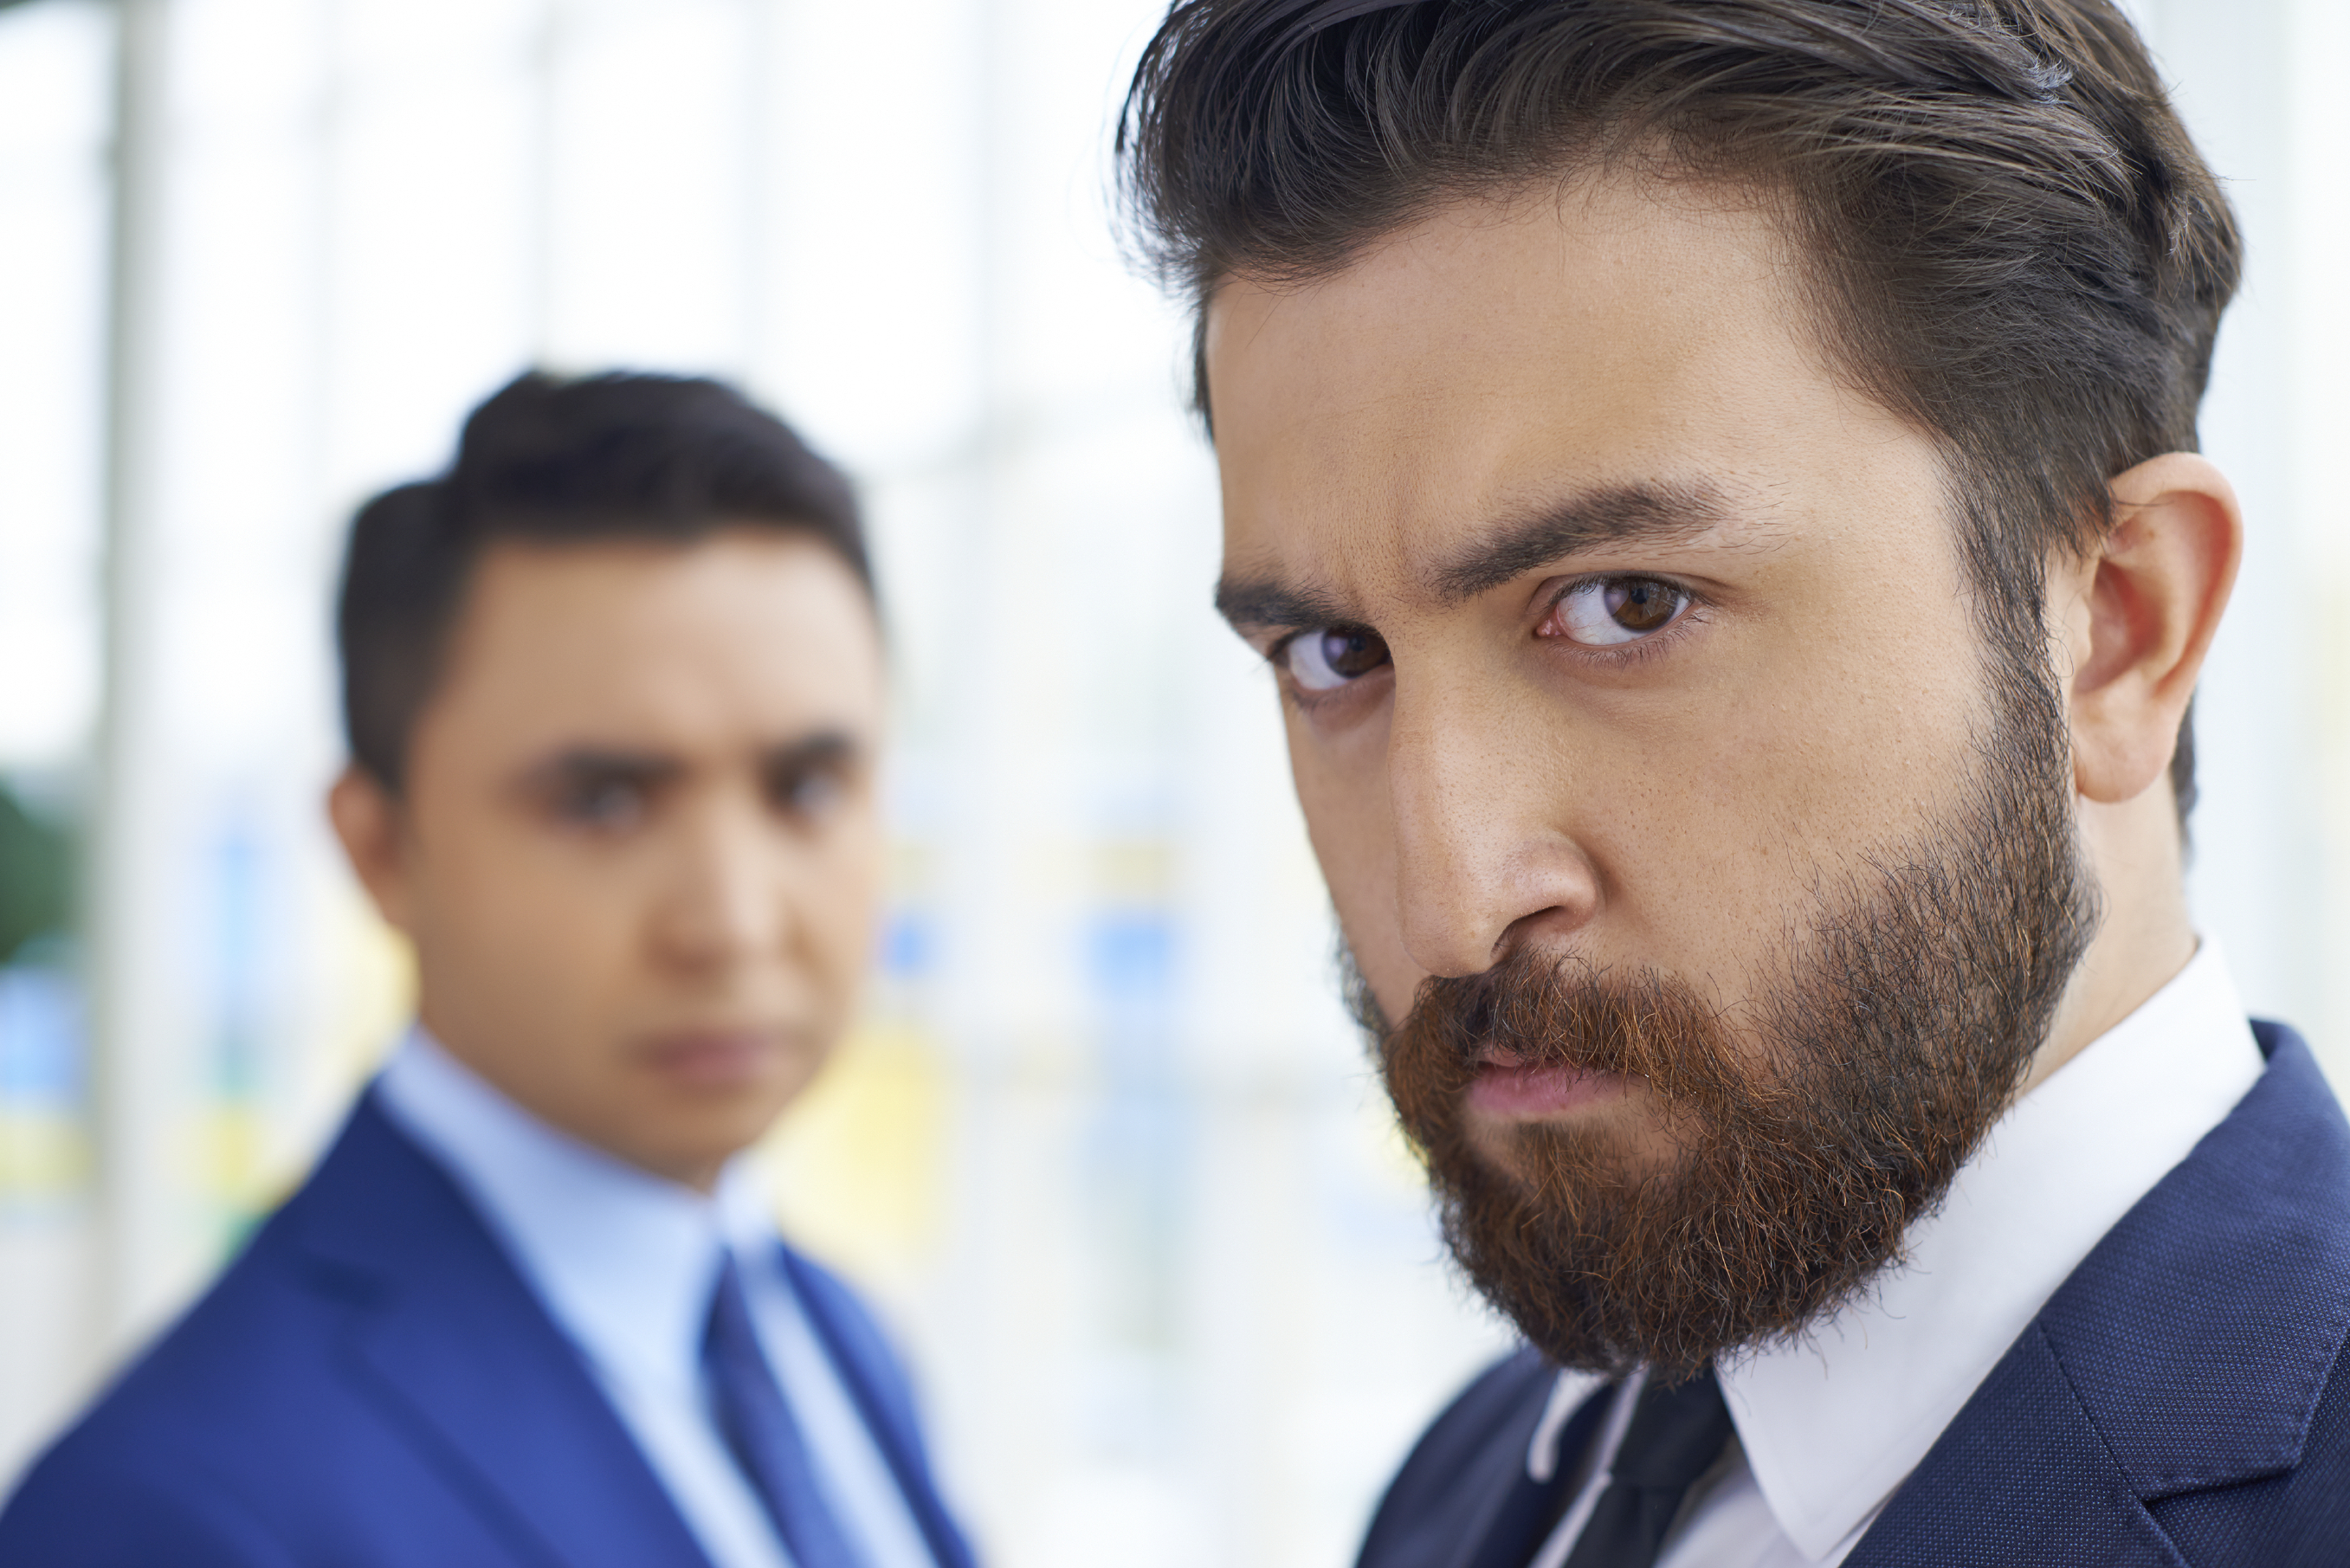 The Top 3 Conflicts Between Millennials & Their Managers